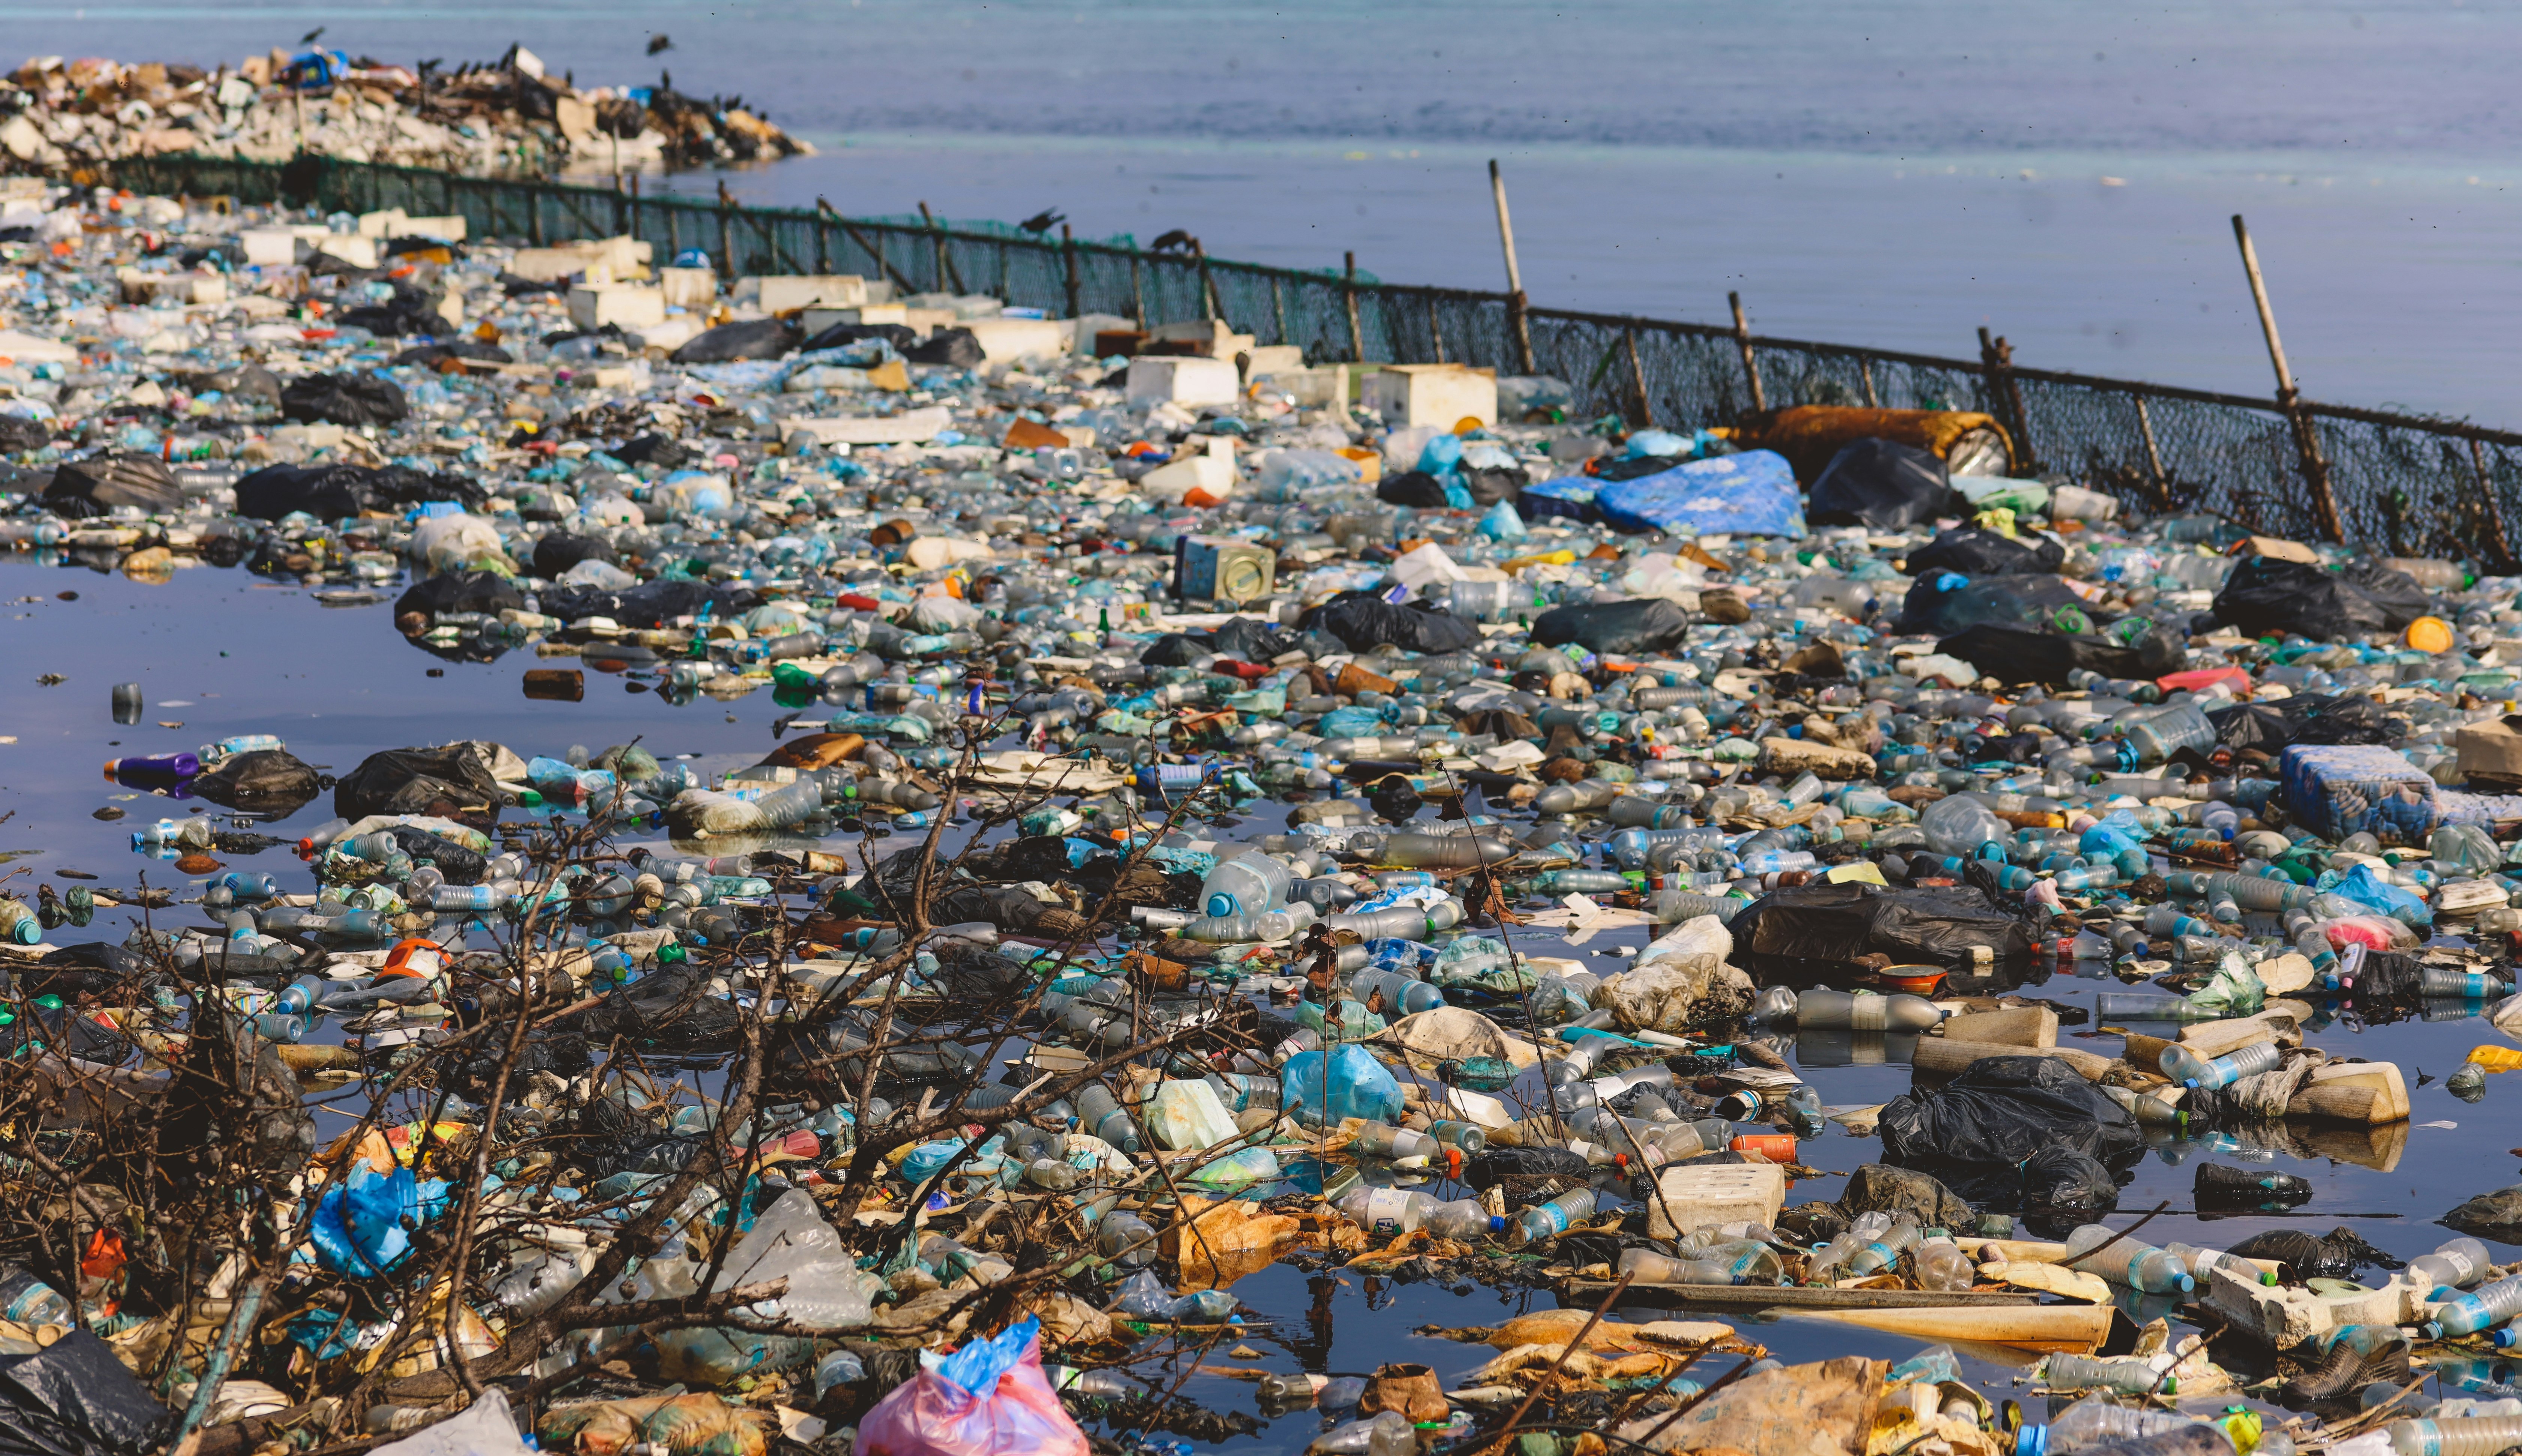 The Maldives is also struggling with waste disposal issues.